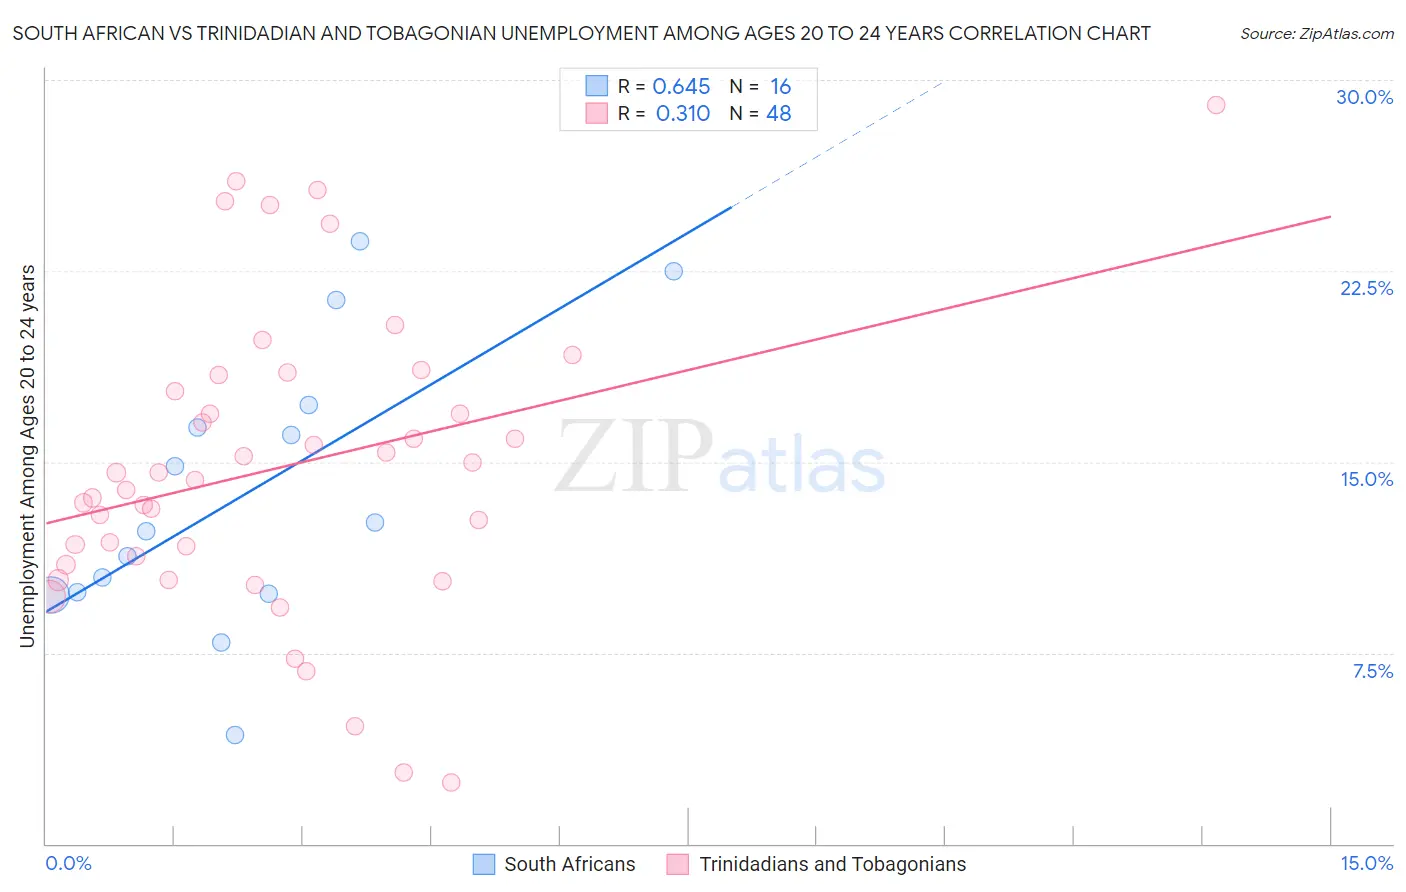 South African vs Trinidadian and Tobagonian Unemployment Among Ages 20 to 24 years